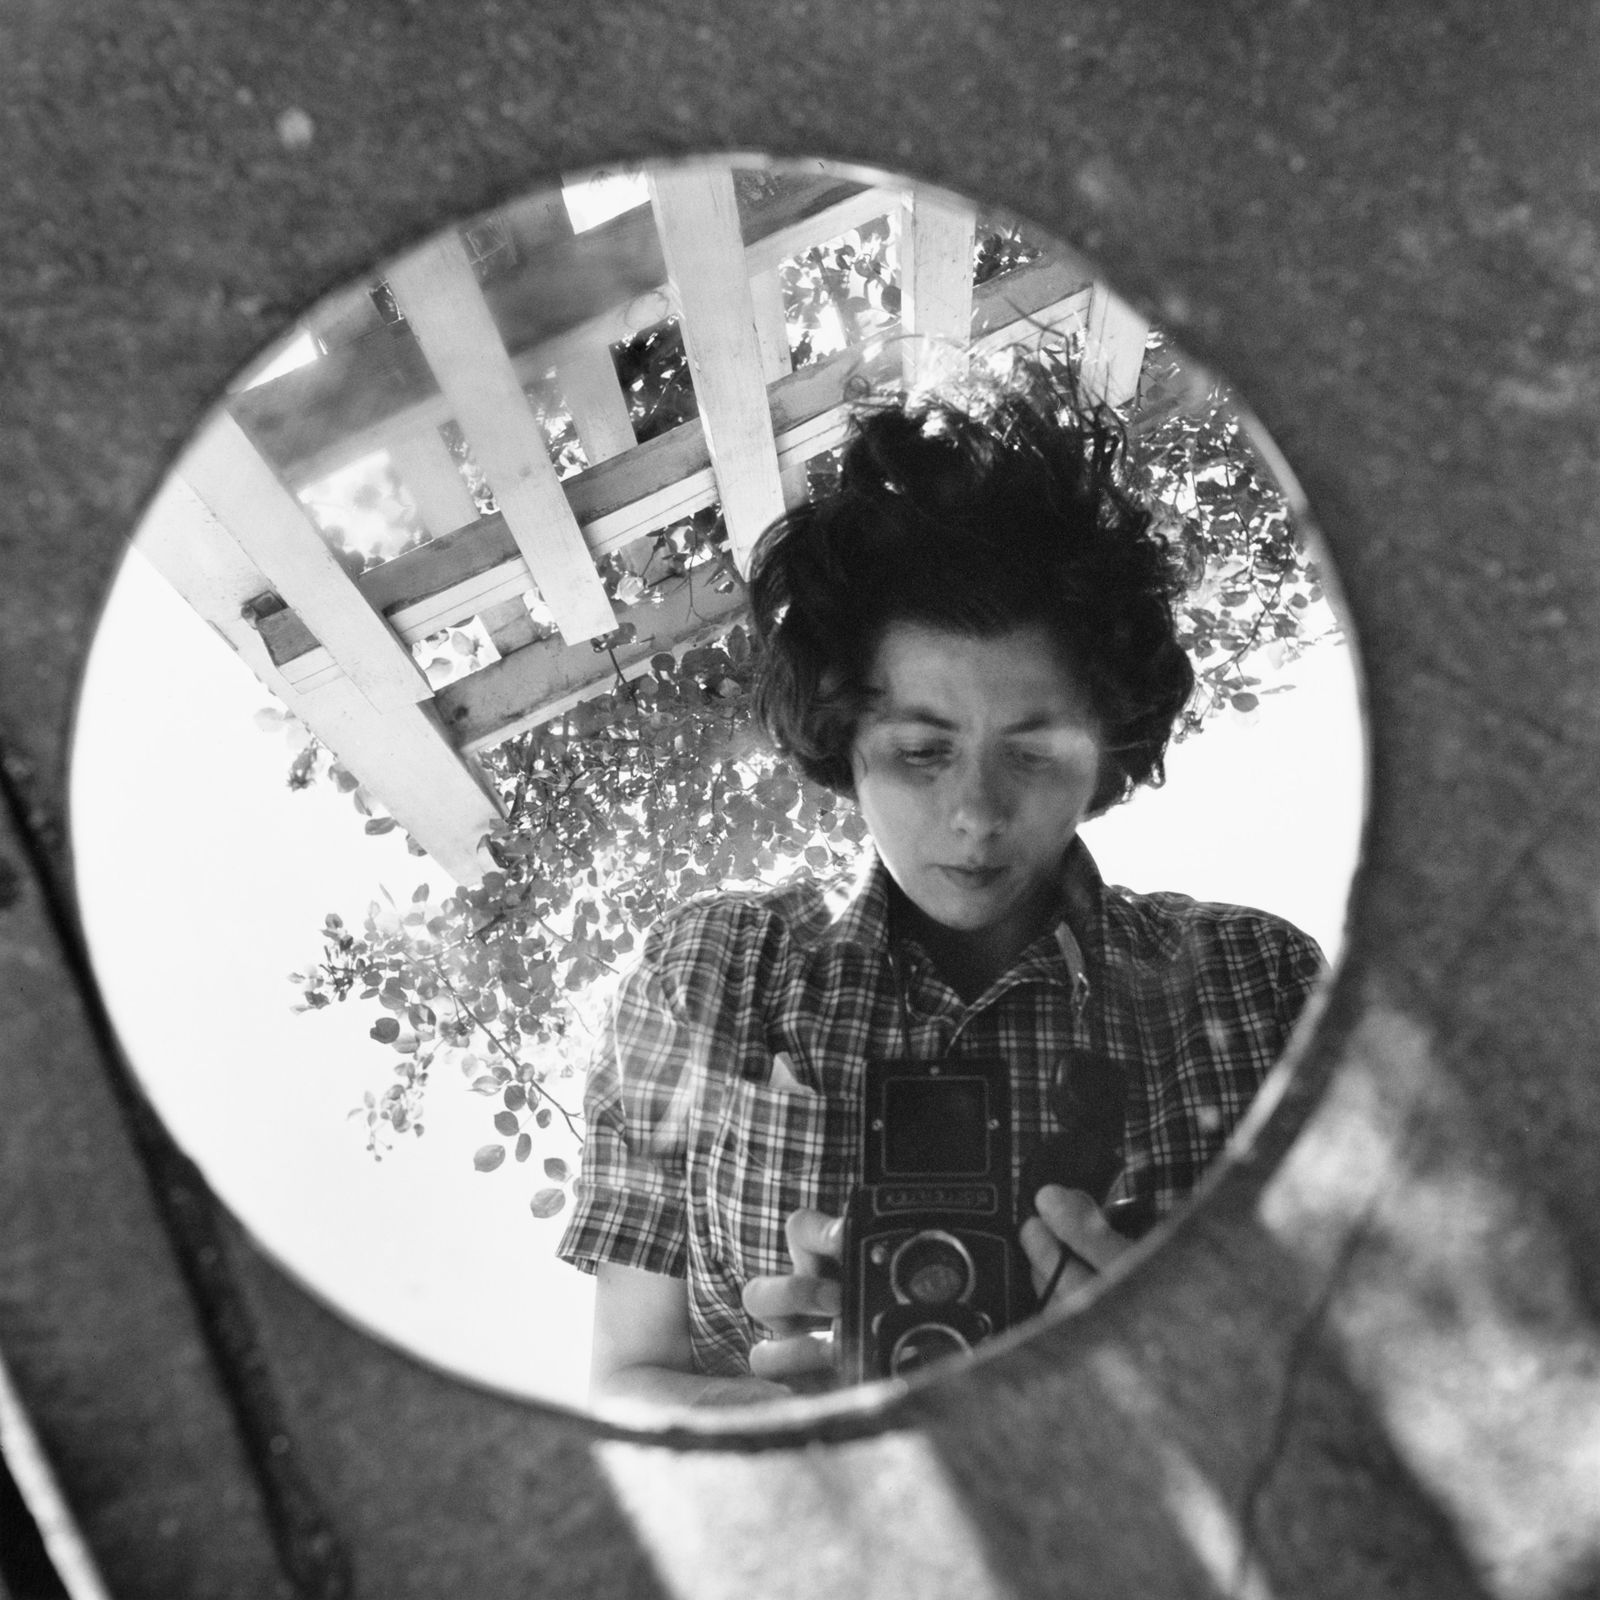 How Vivian Maier, the Enigmatic Nanny Who Took 150,000 Photographs, Found  Her Place in History | Smart News| Smithsonian Magazine